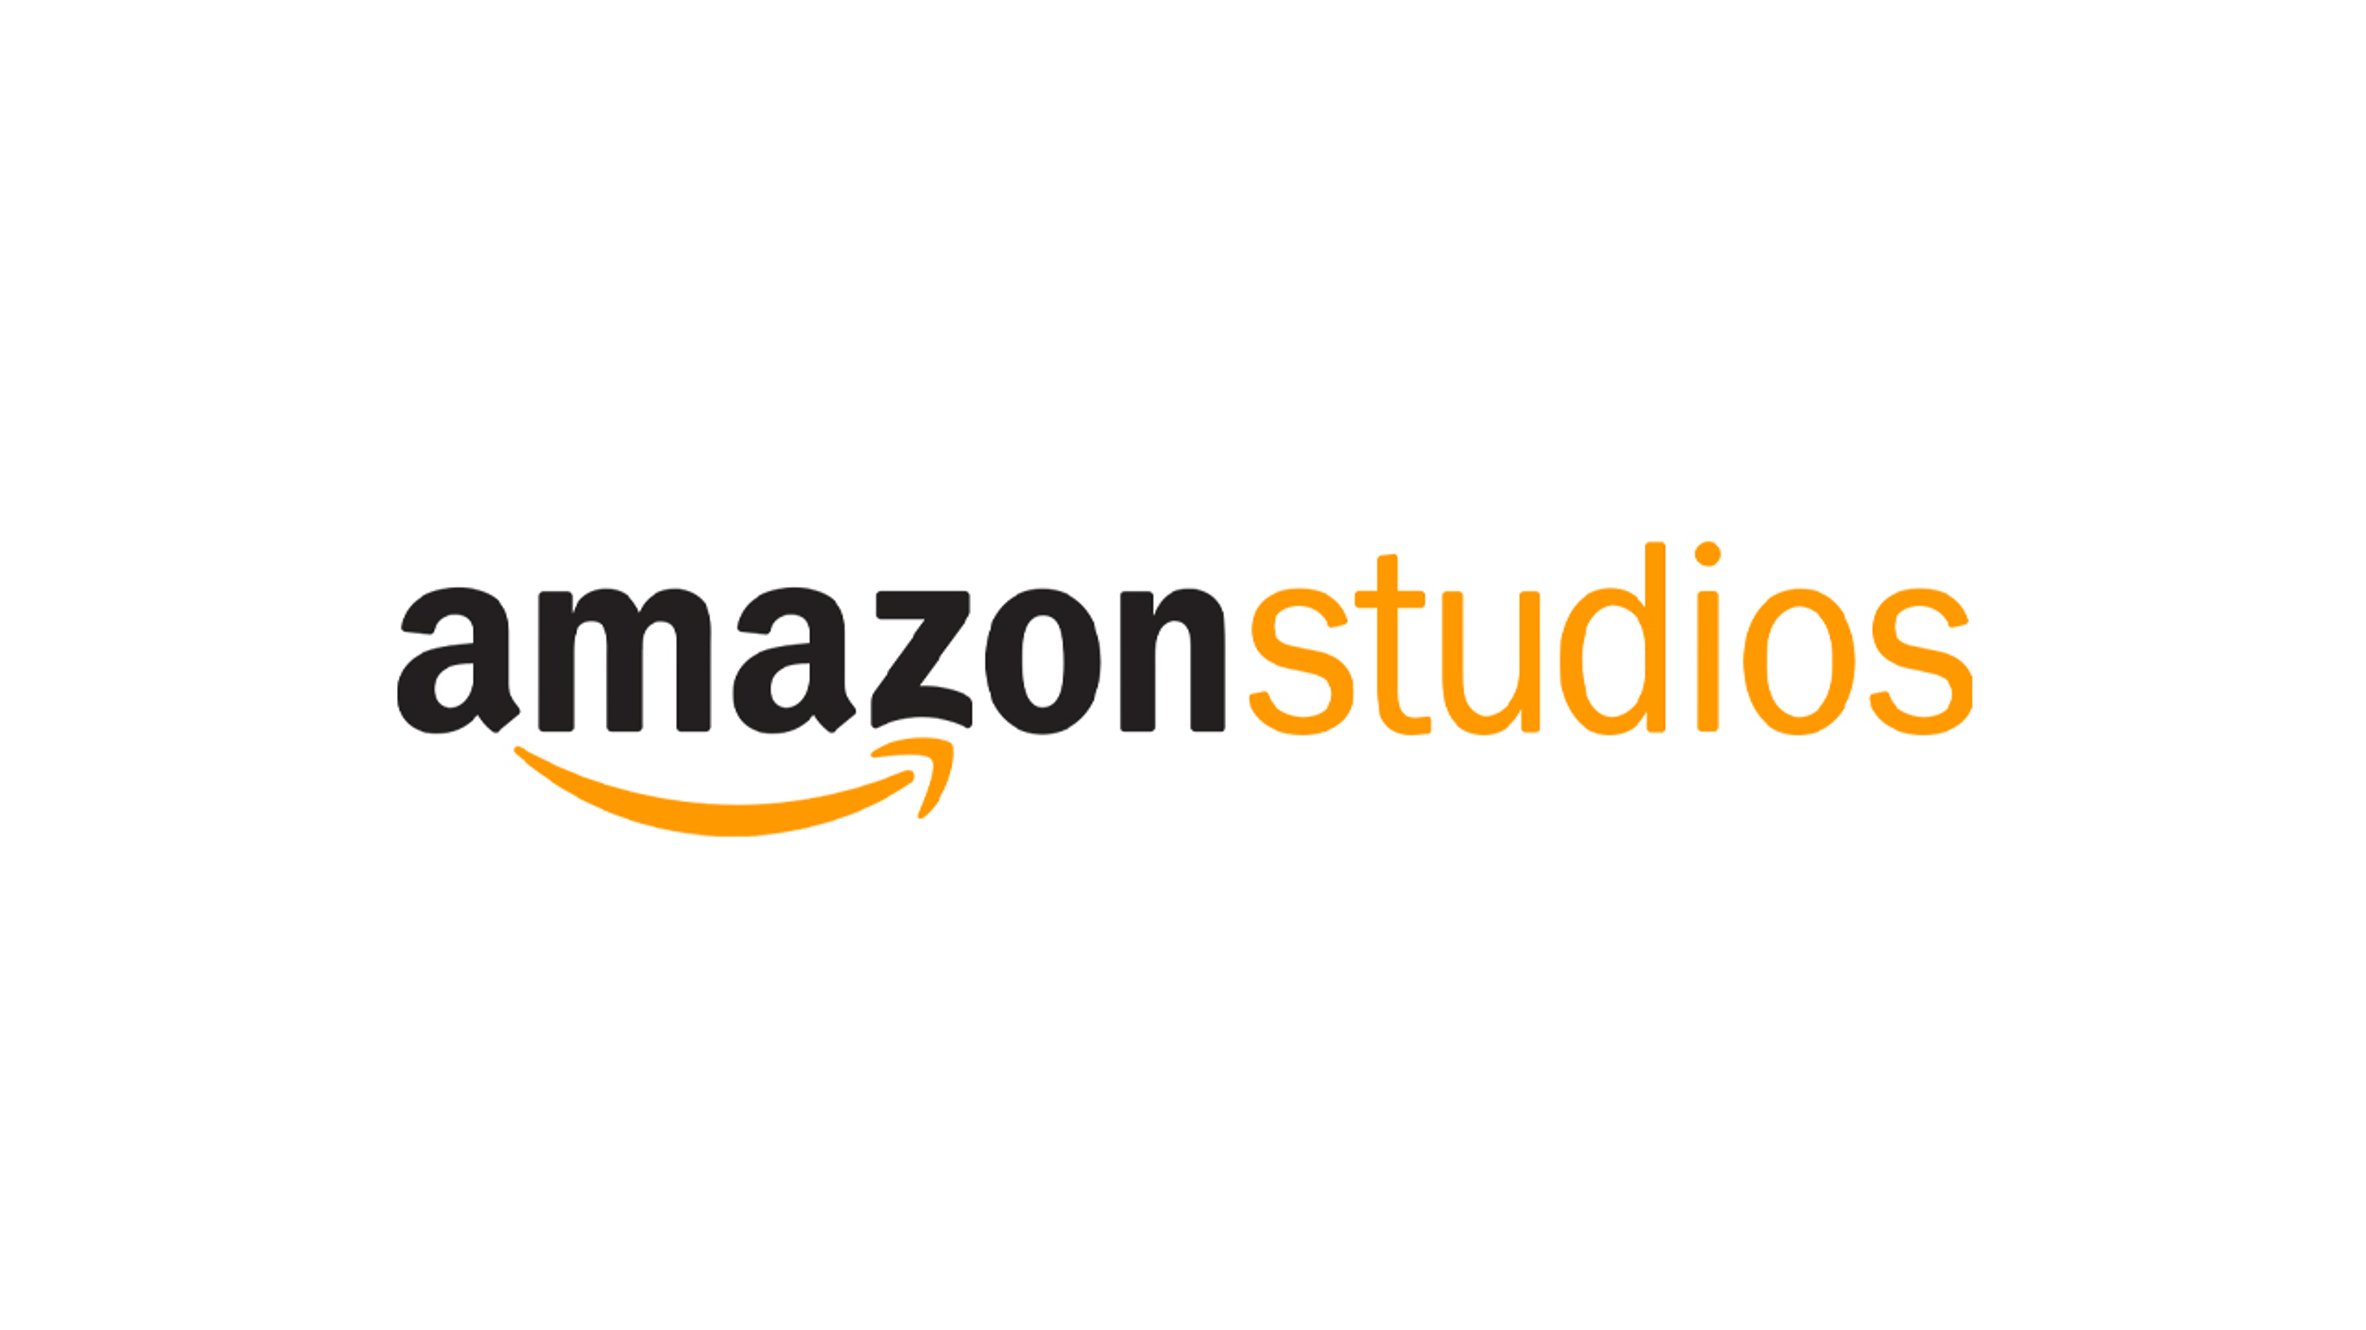 Amazon Series Casting for a Speaking Role